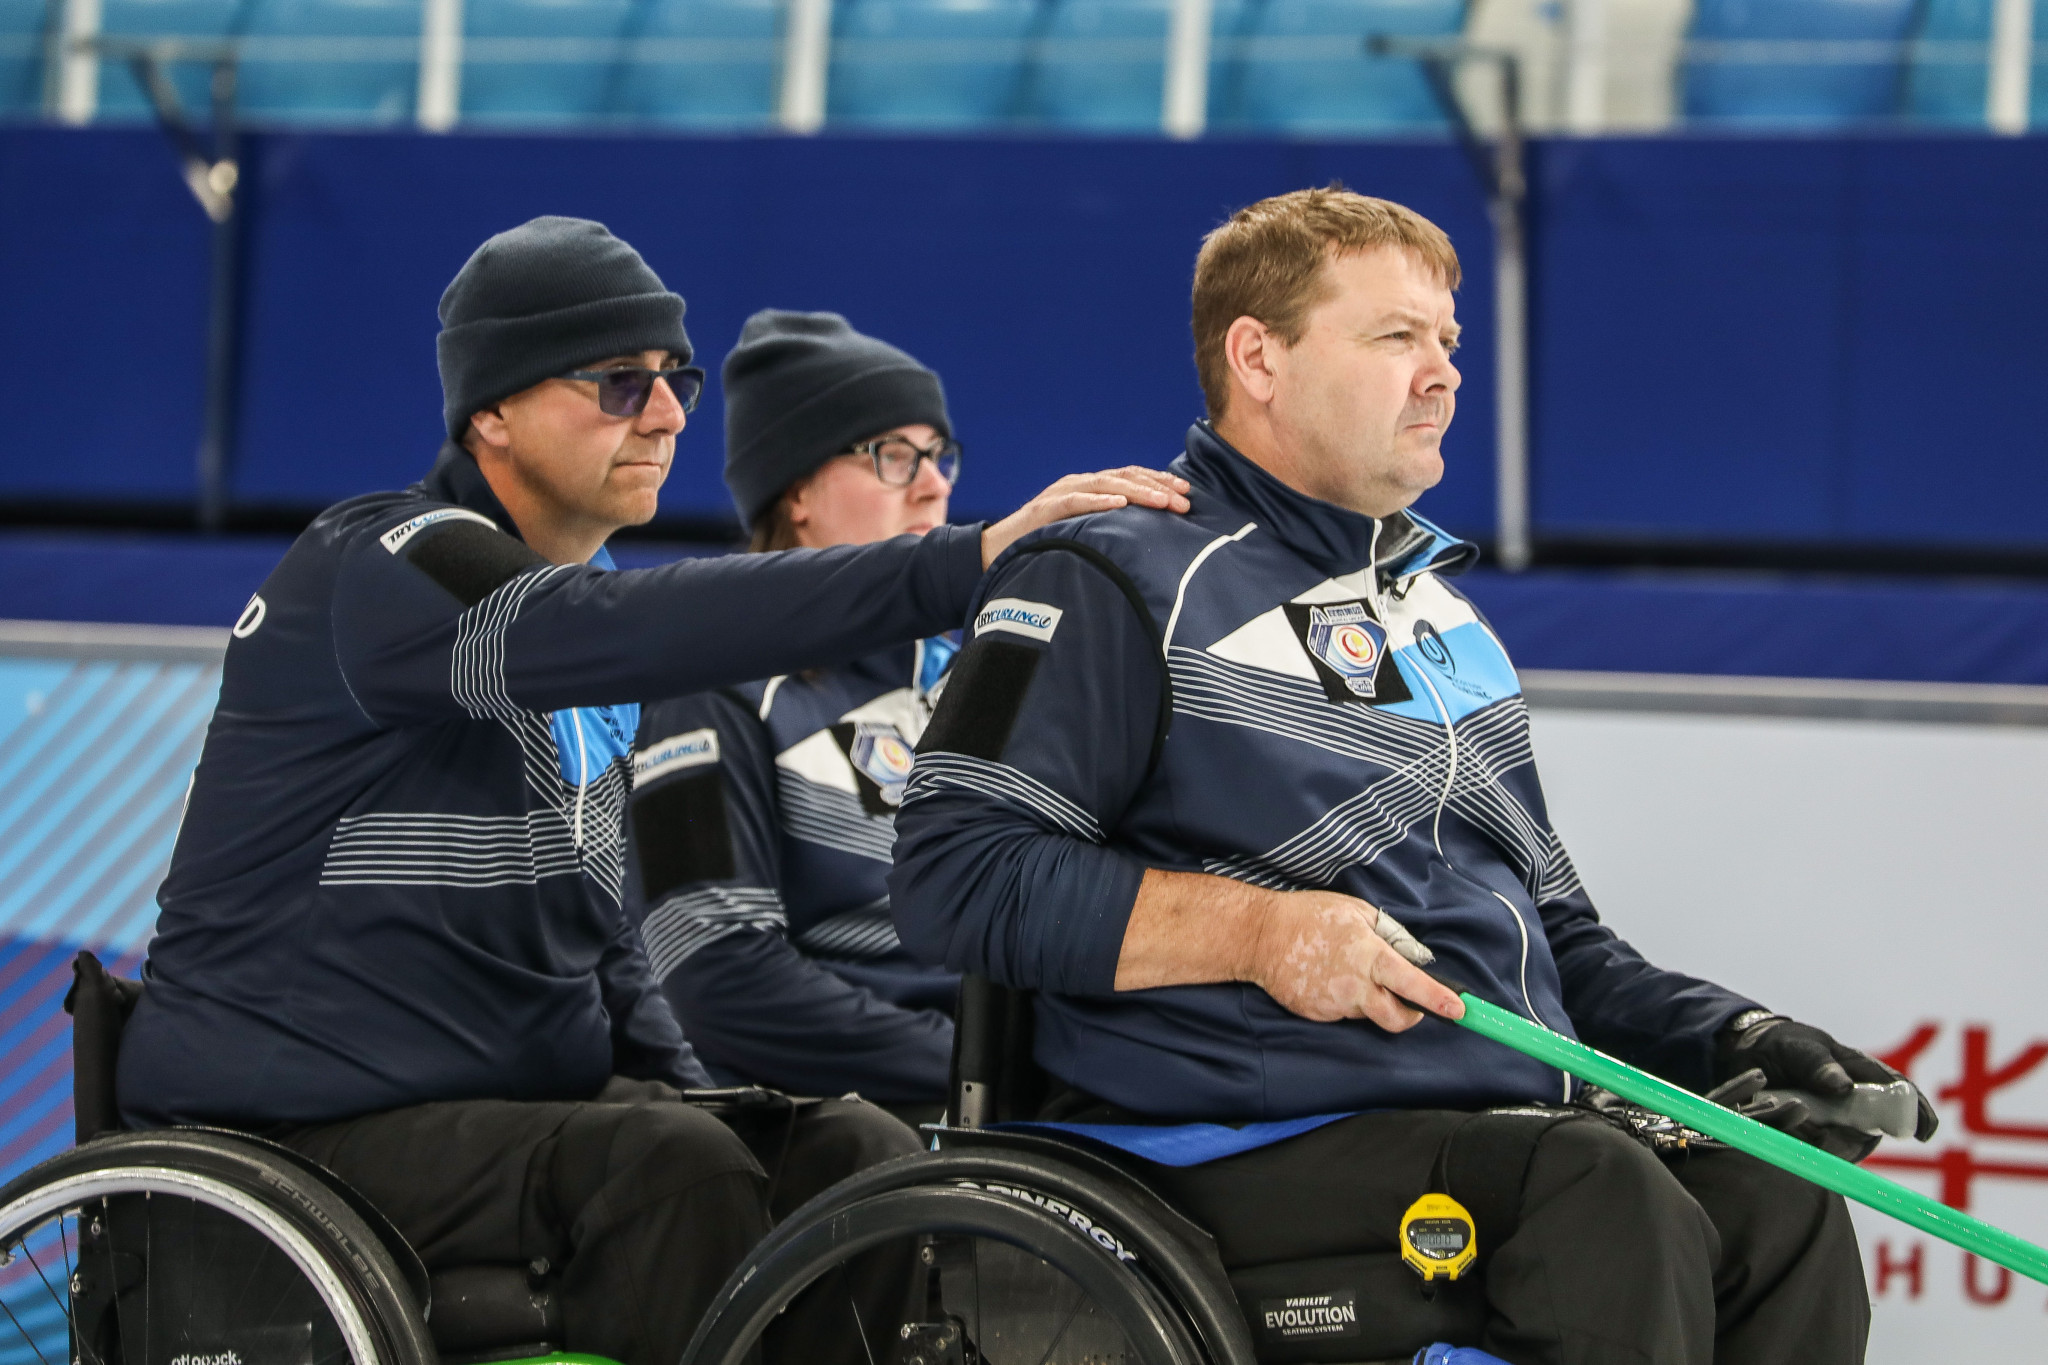 Scotland's edging out China opened the door to Sweden and the RCF ©World Curling Federation